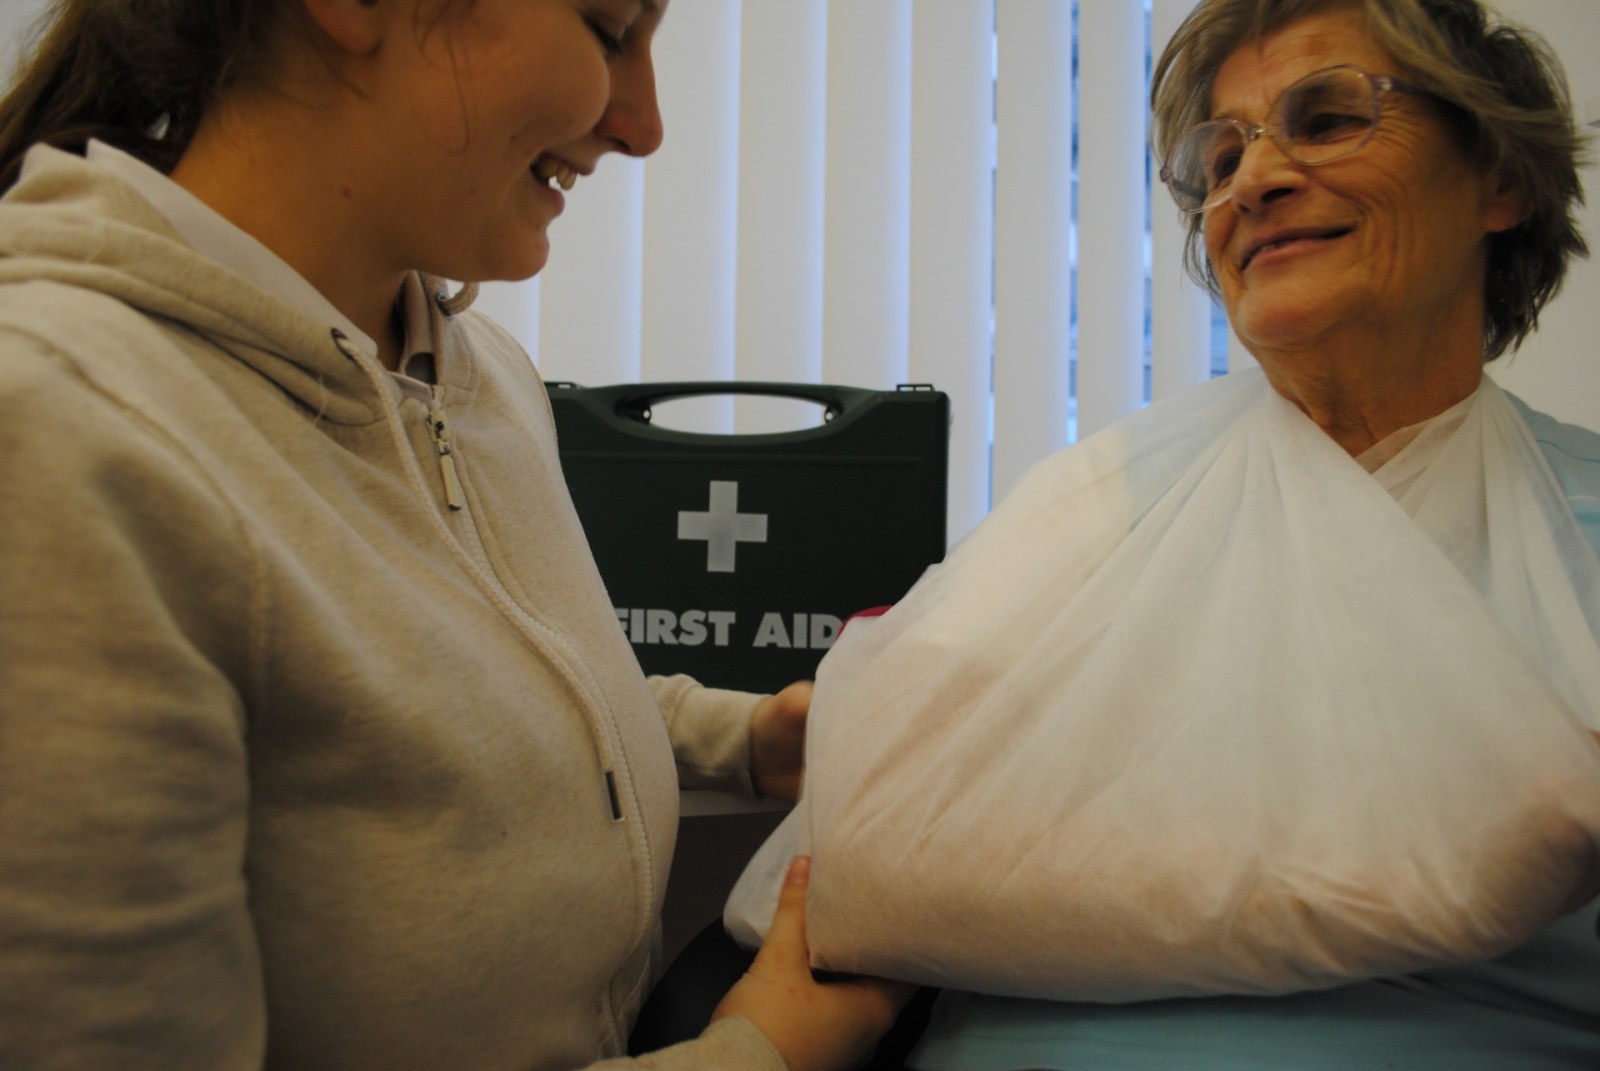 Free First Aid training for Aylesbury residents Picture 1